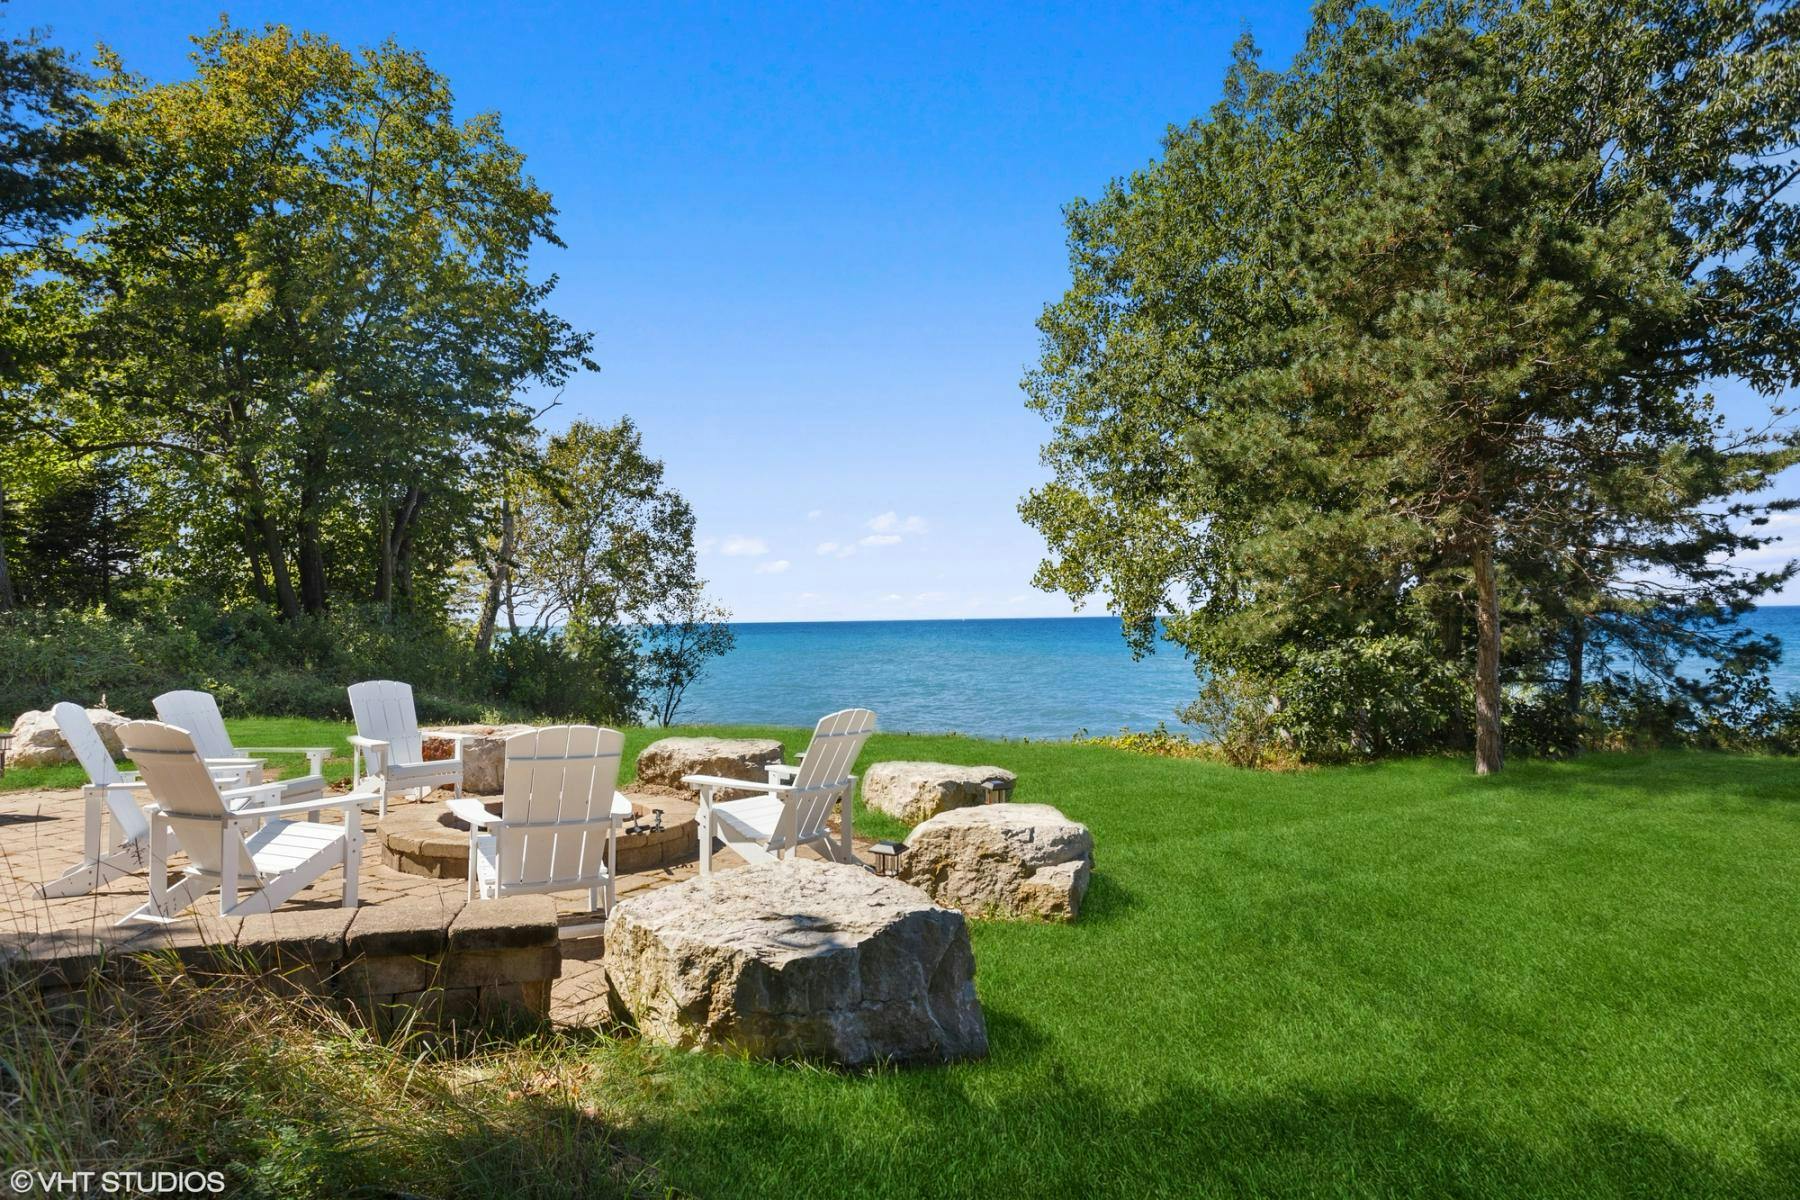 Outdoor seating by the lake at a Southwest Michigan vacation rental